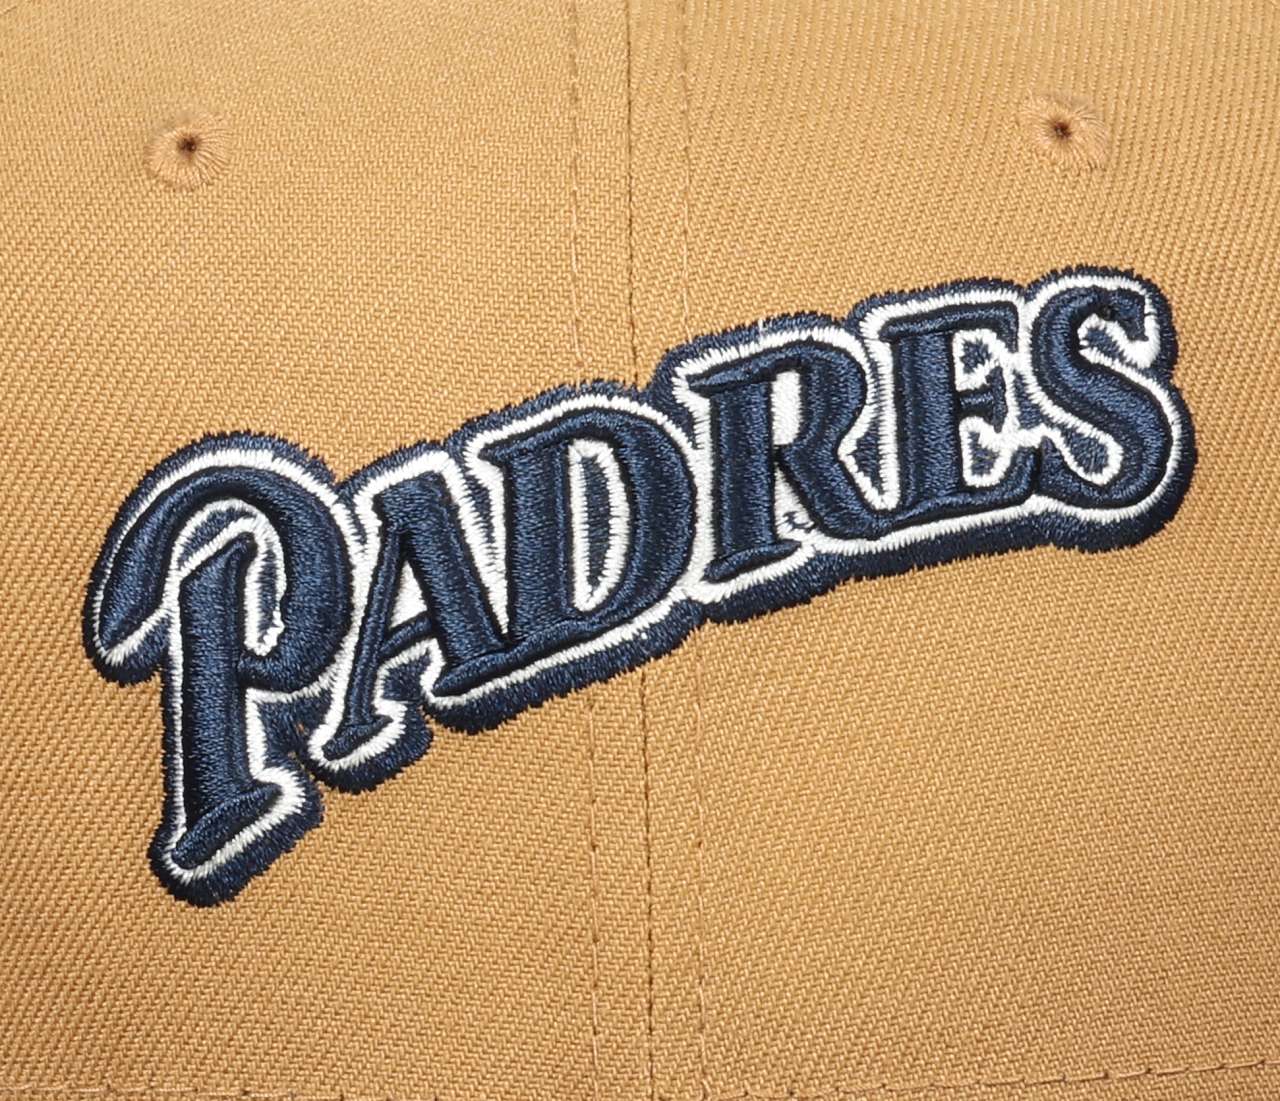 San Diego Padres MLB Cooperstown Script Wheat Navy 59Fifty Basecap New Era